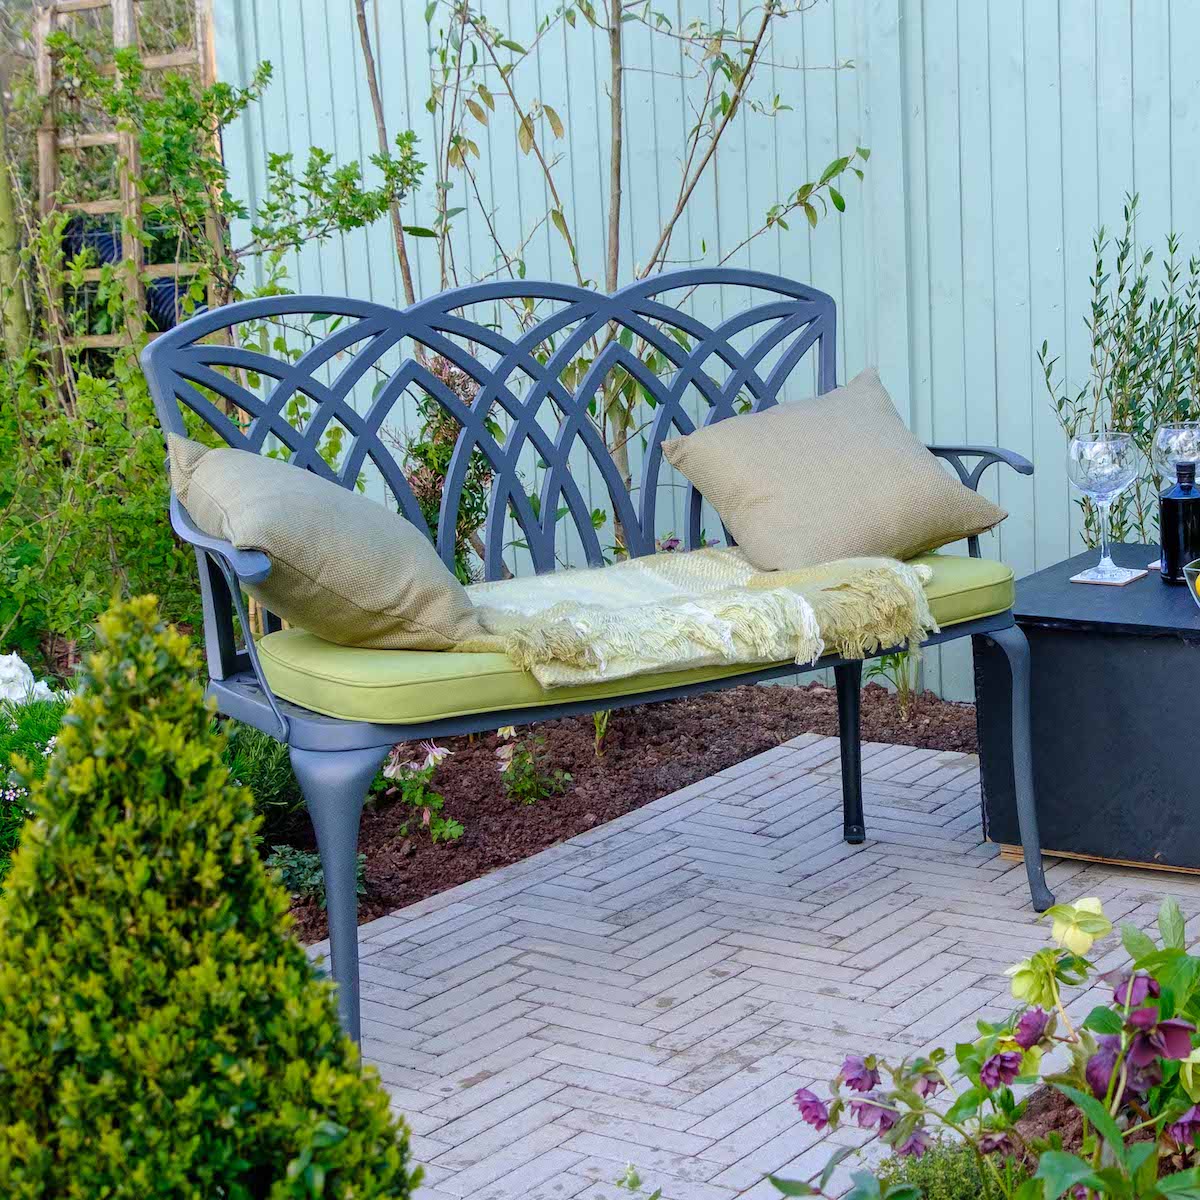 What are the advantages of putting a bench in your outdoor space?